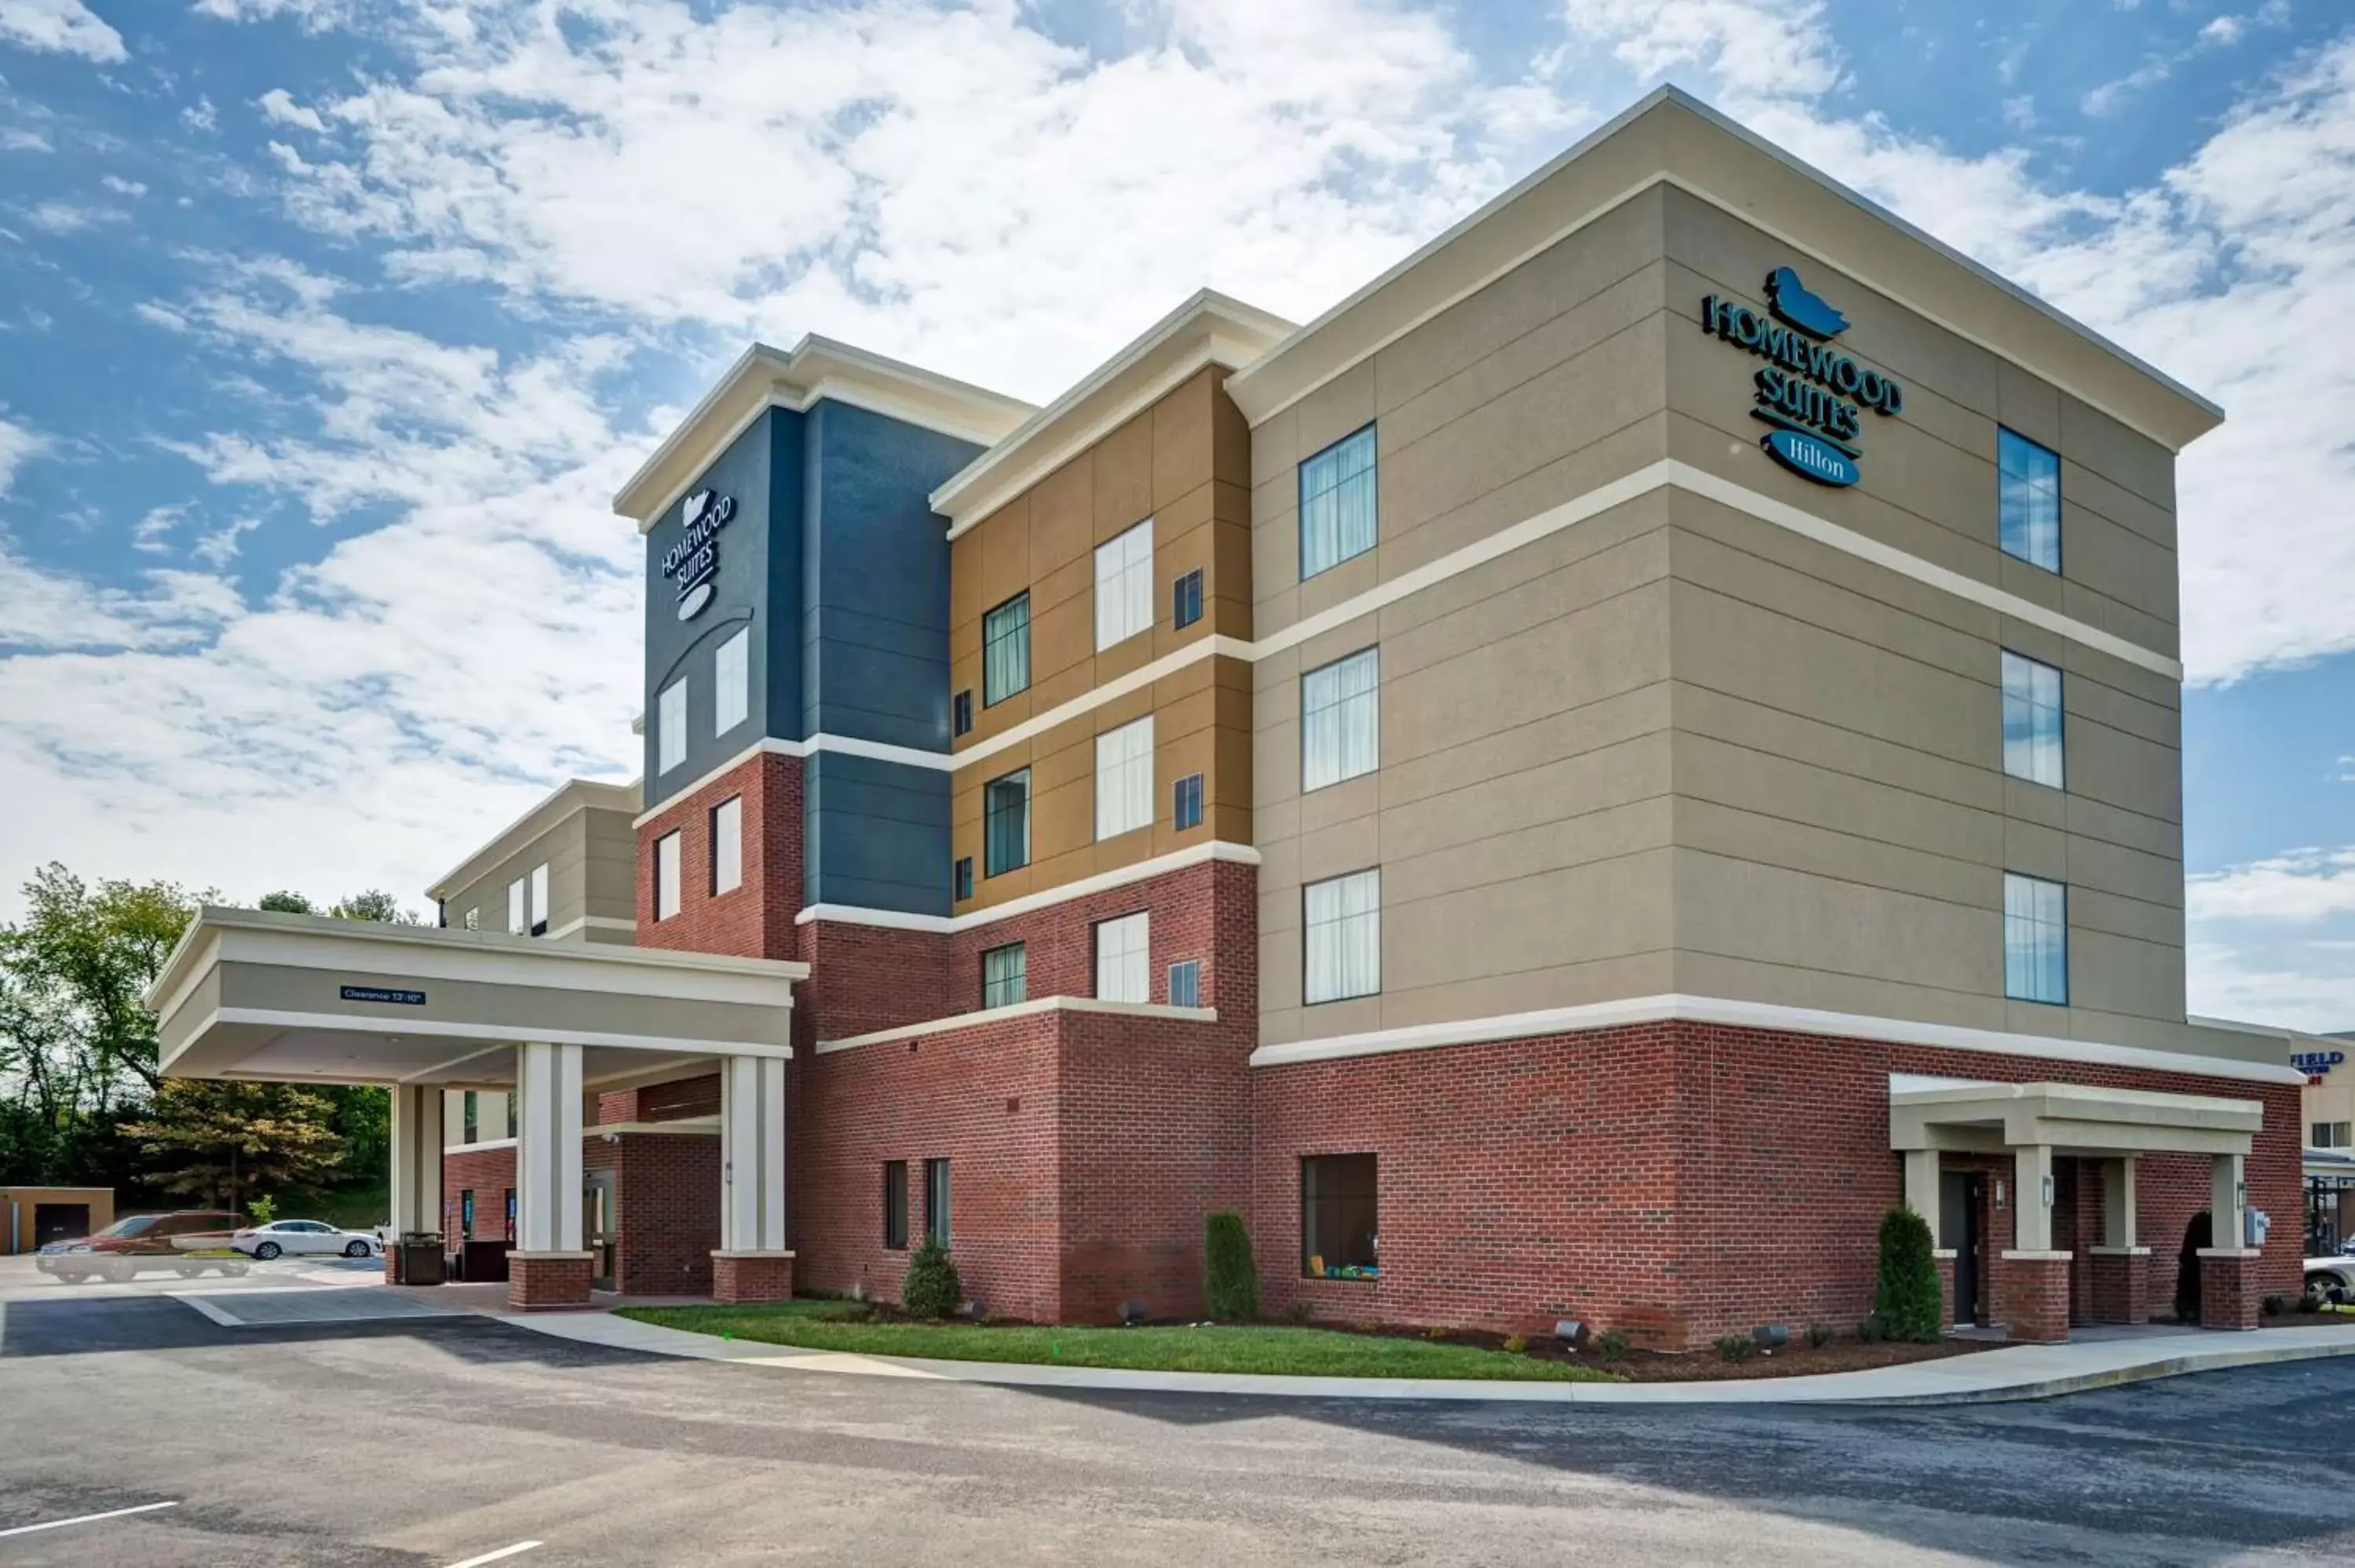 Property Building in Homewood Suites by Hilton Christiansburg